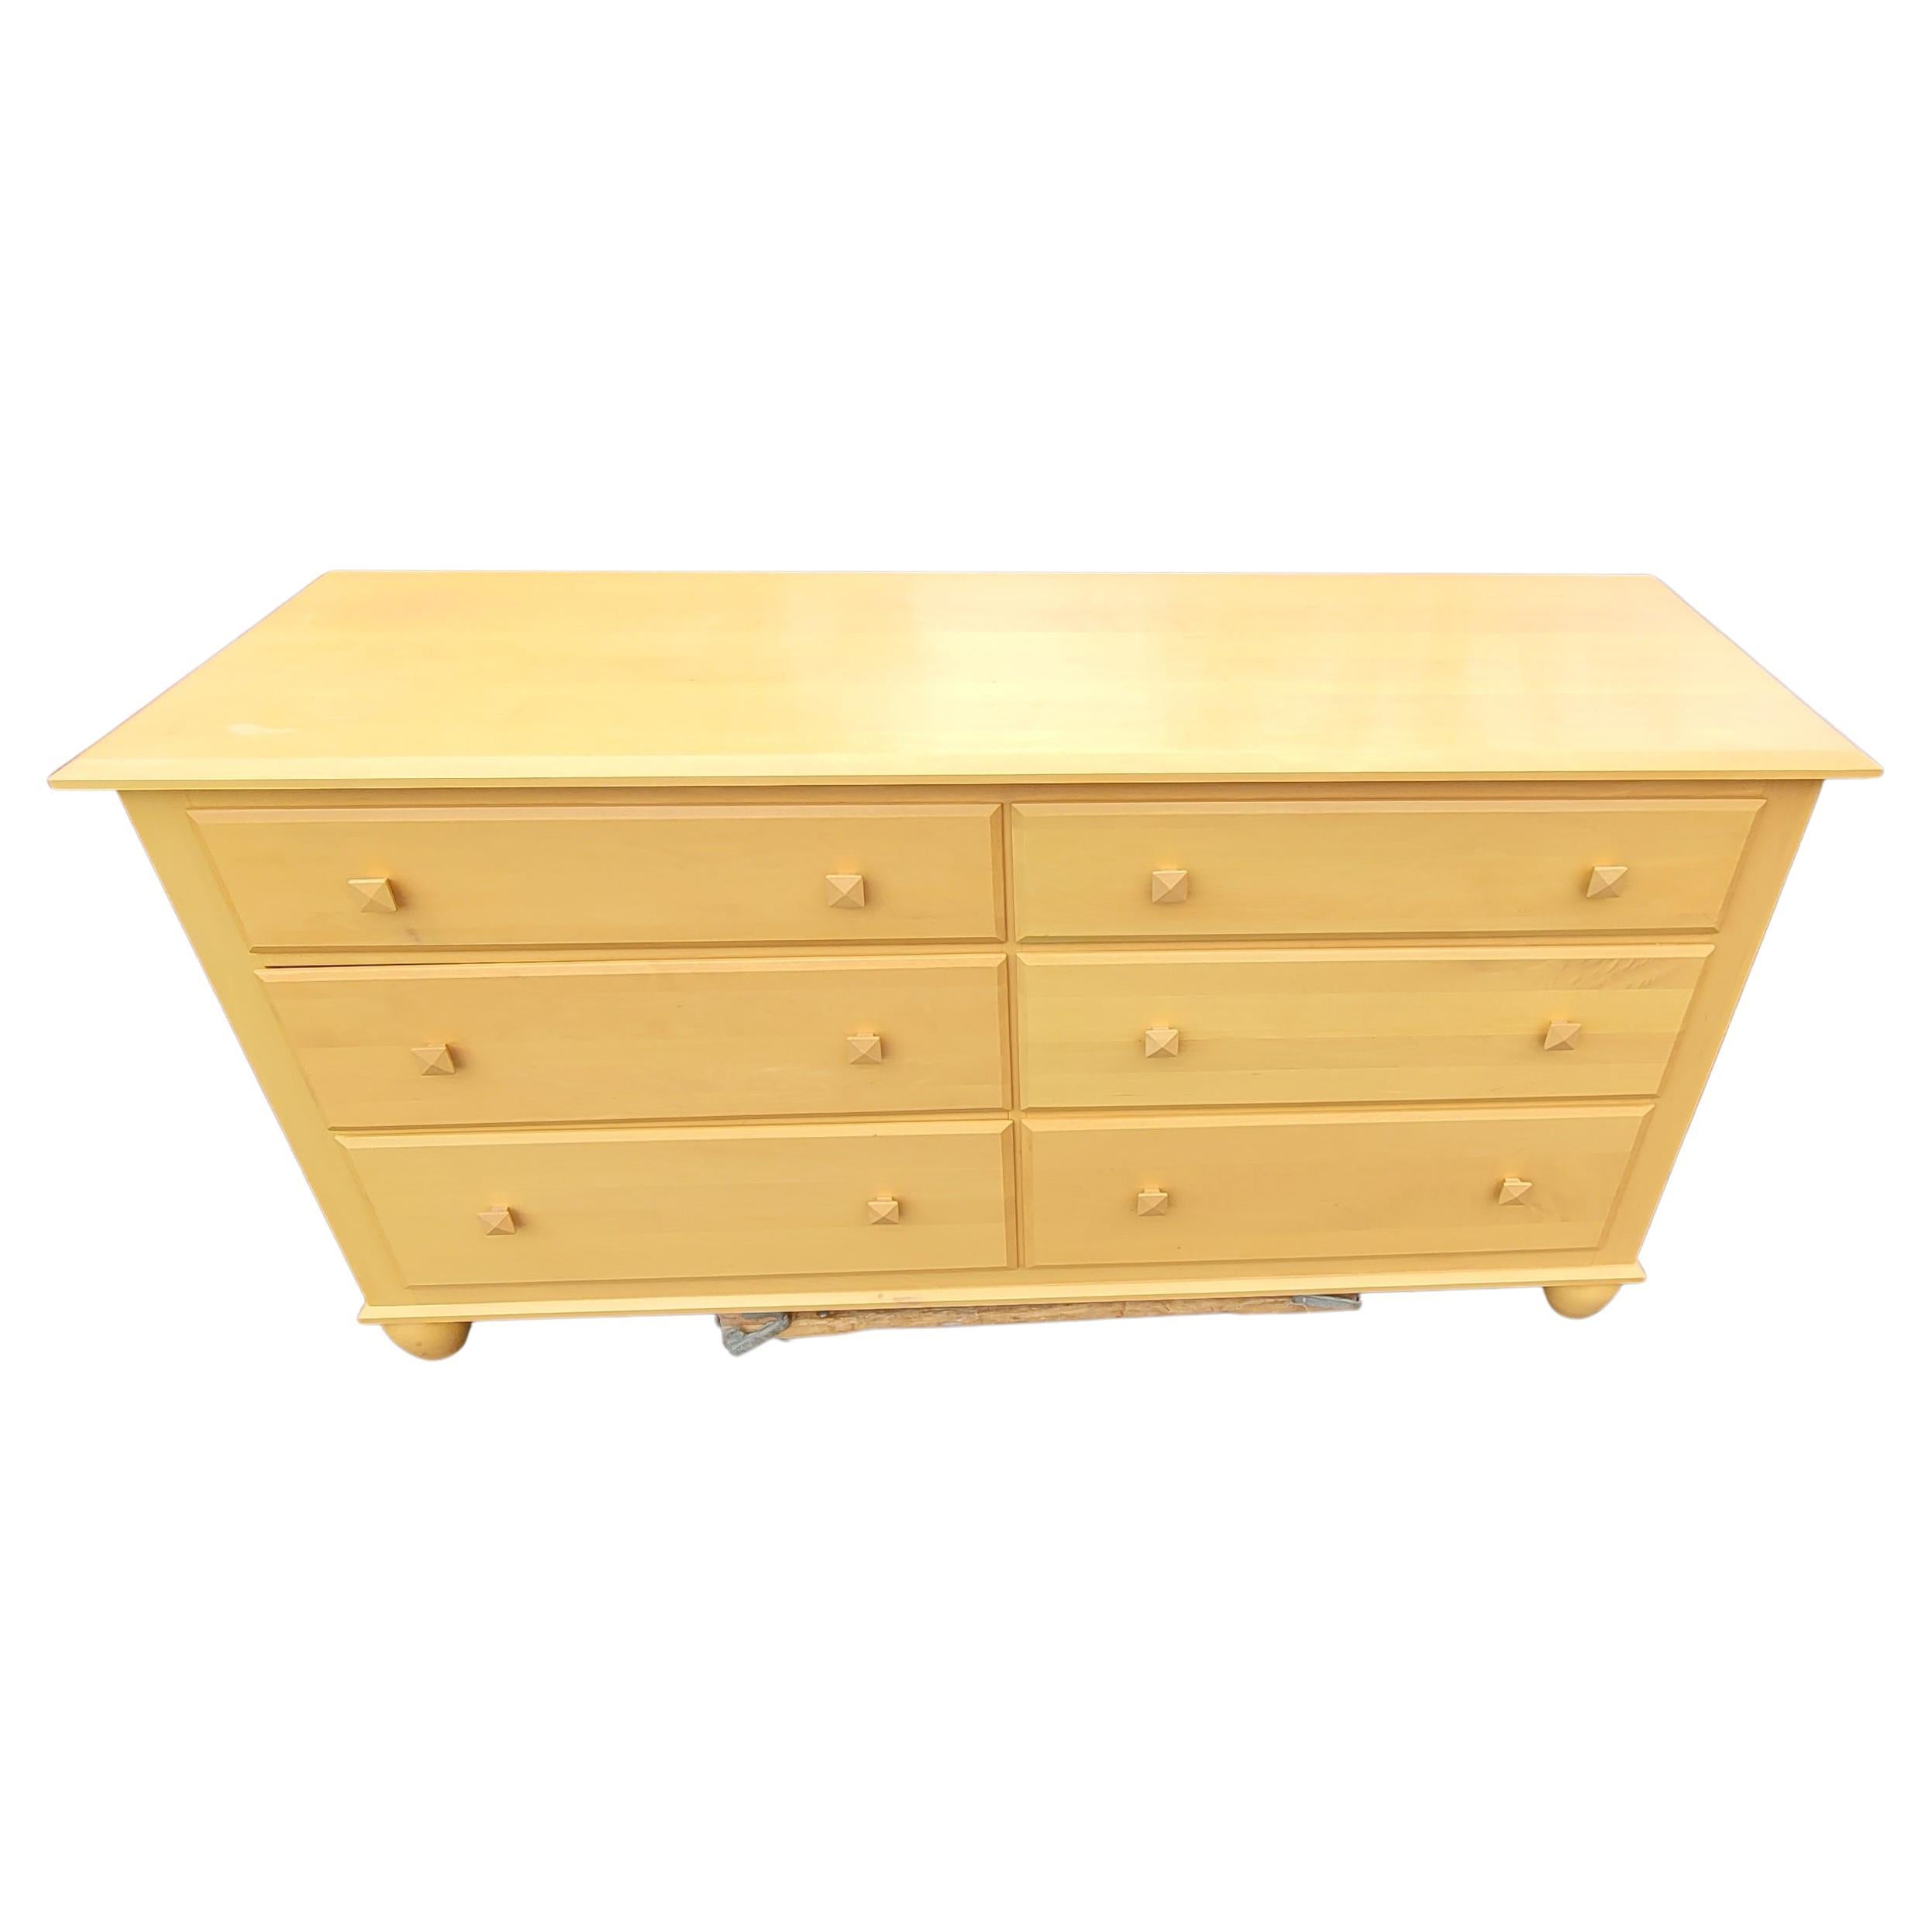 Ethan Allen American Dimensions Collection birch double dresser in great condition. Features 6 drawers all birch wood with dovetail joints, and proprietary Ethan Allen knobs. Drawers internal measures are 25